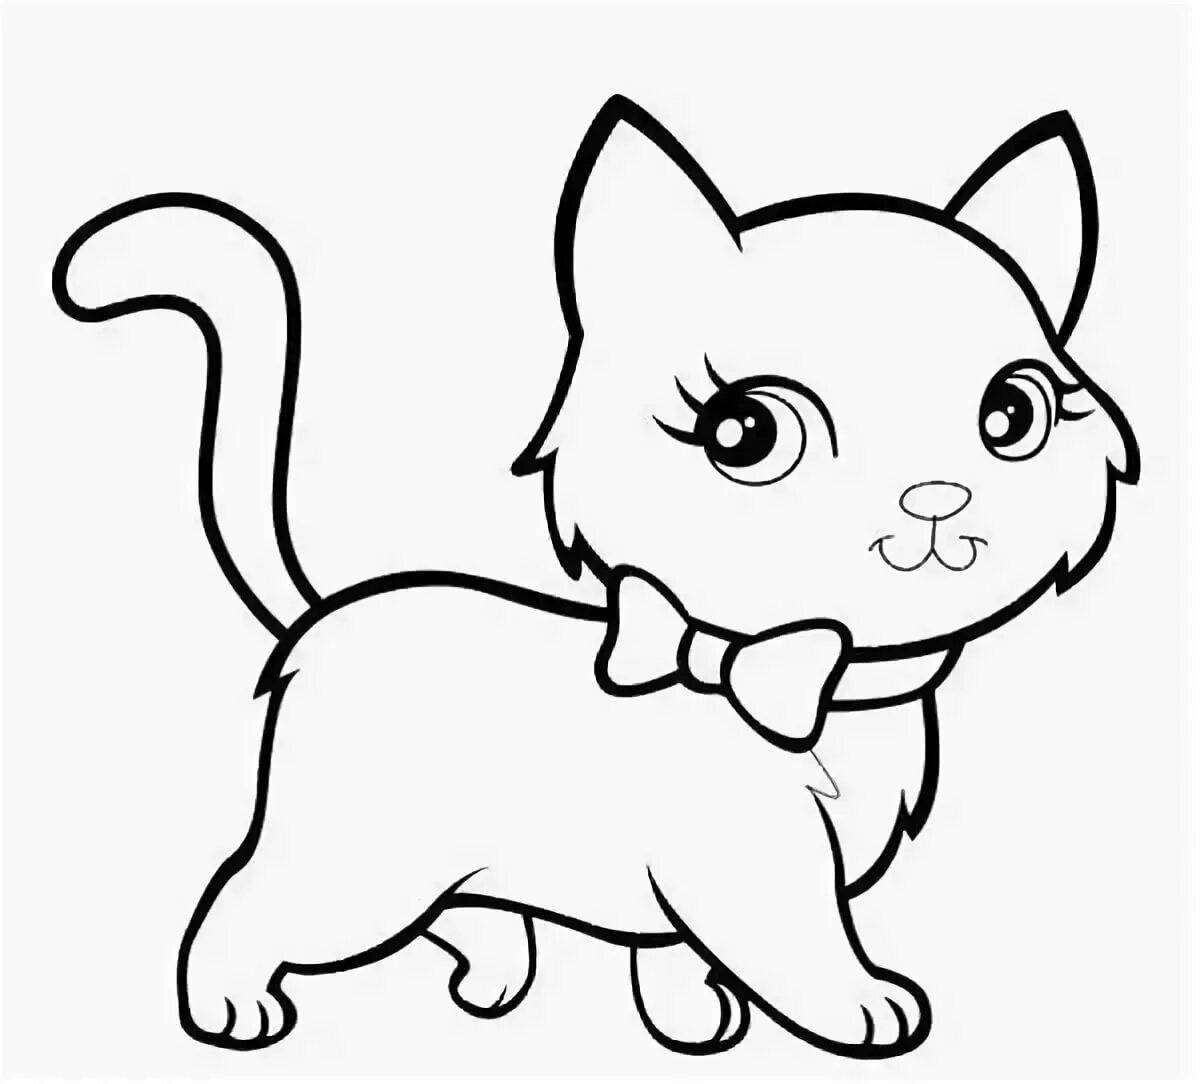 Friendly cat coloring book for kids 2-3 years old